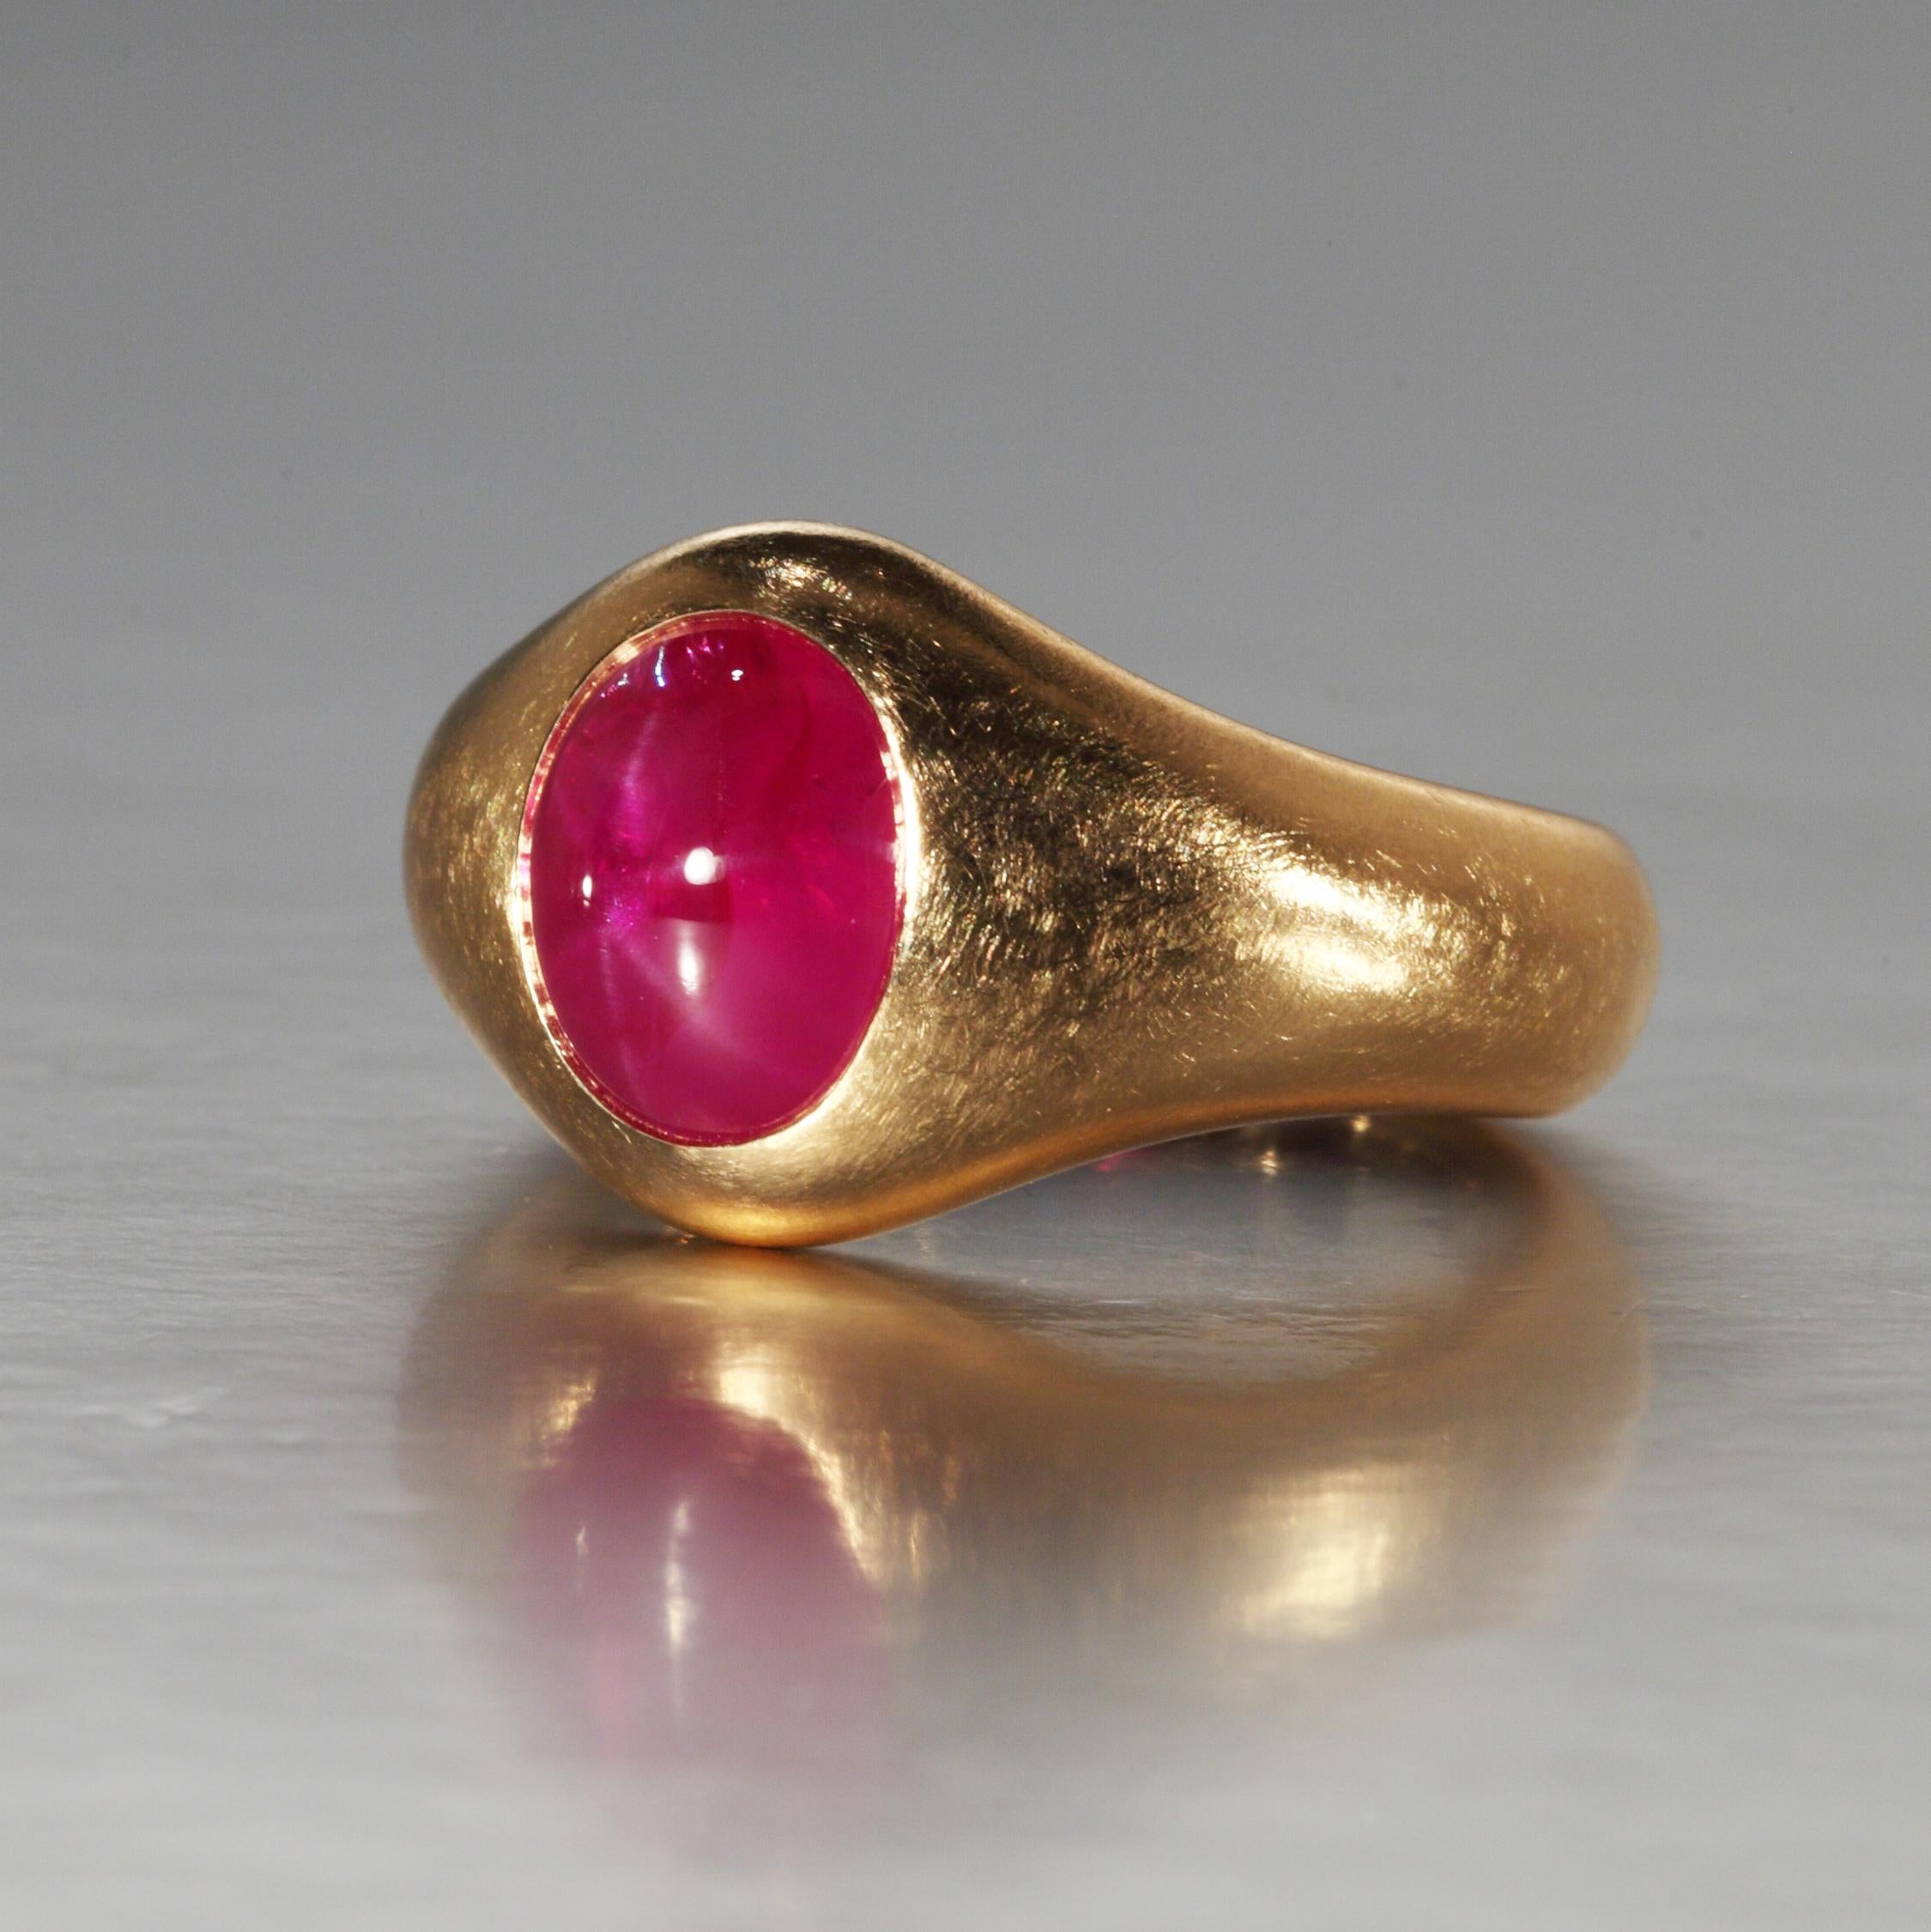 This fine natural Burma star ruby of 6.03 carats is set in a rose gold ring. An inner white gold spring moves easily over the knuckle and holds the ring in place. The ruby is accompanied by a GRS Report. It is designed and hand made (lost wax